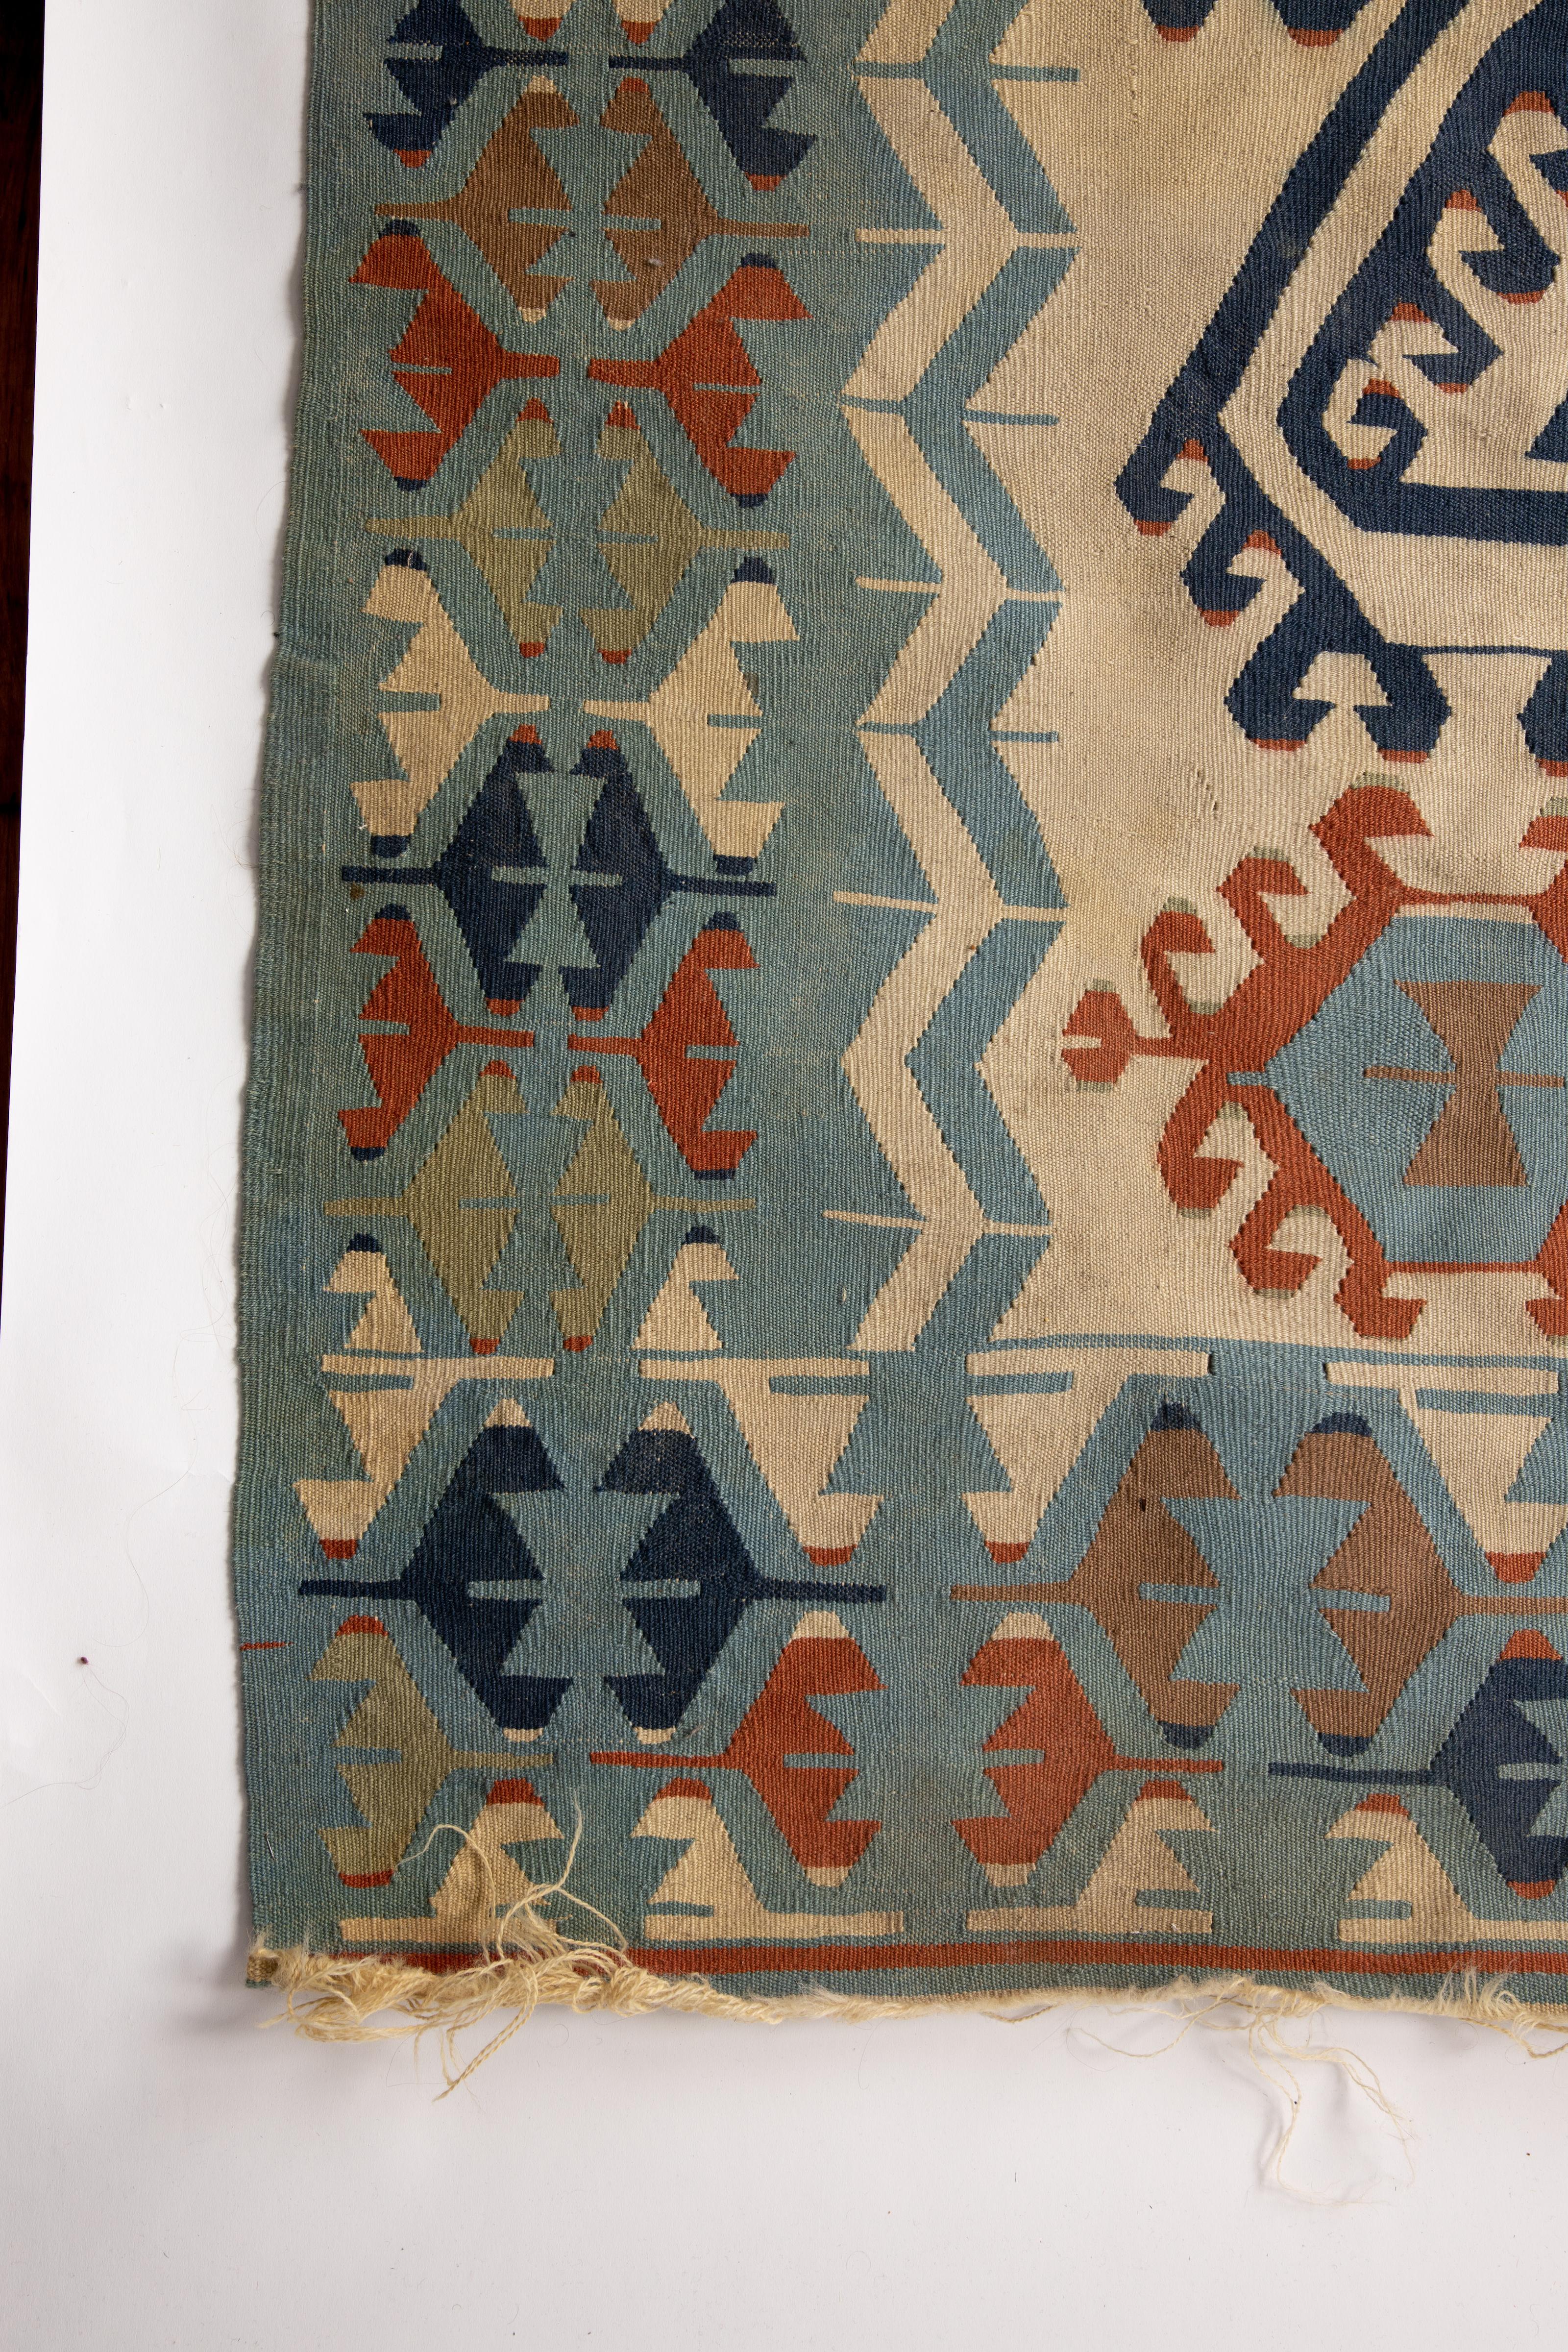 Ornate handwoven flat-weave kilim rug with natural pigment dyed wool. The designs woven in to the rug are all symbolic that have been passed done through generations of weavers for hundreds of years, if not more. Rich colors of indigo, coral, sky